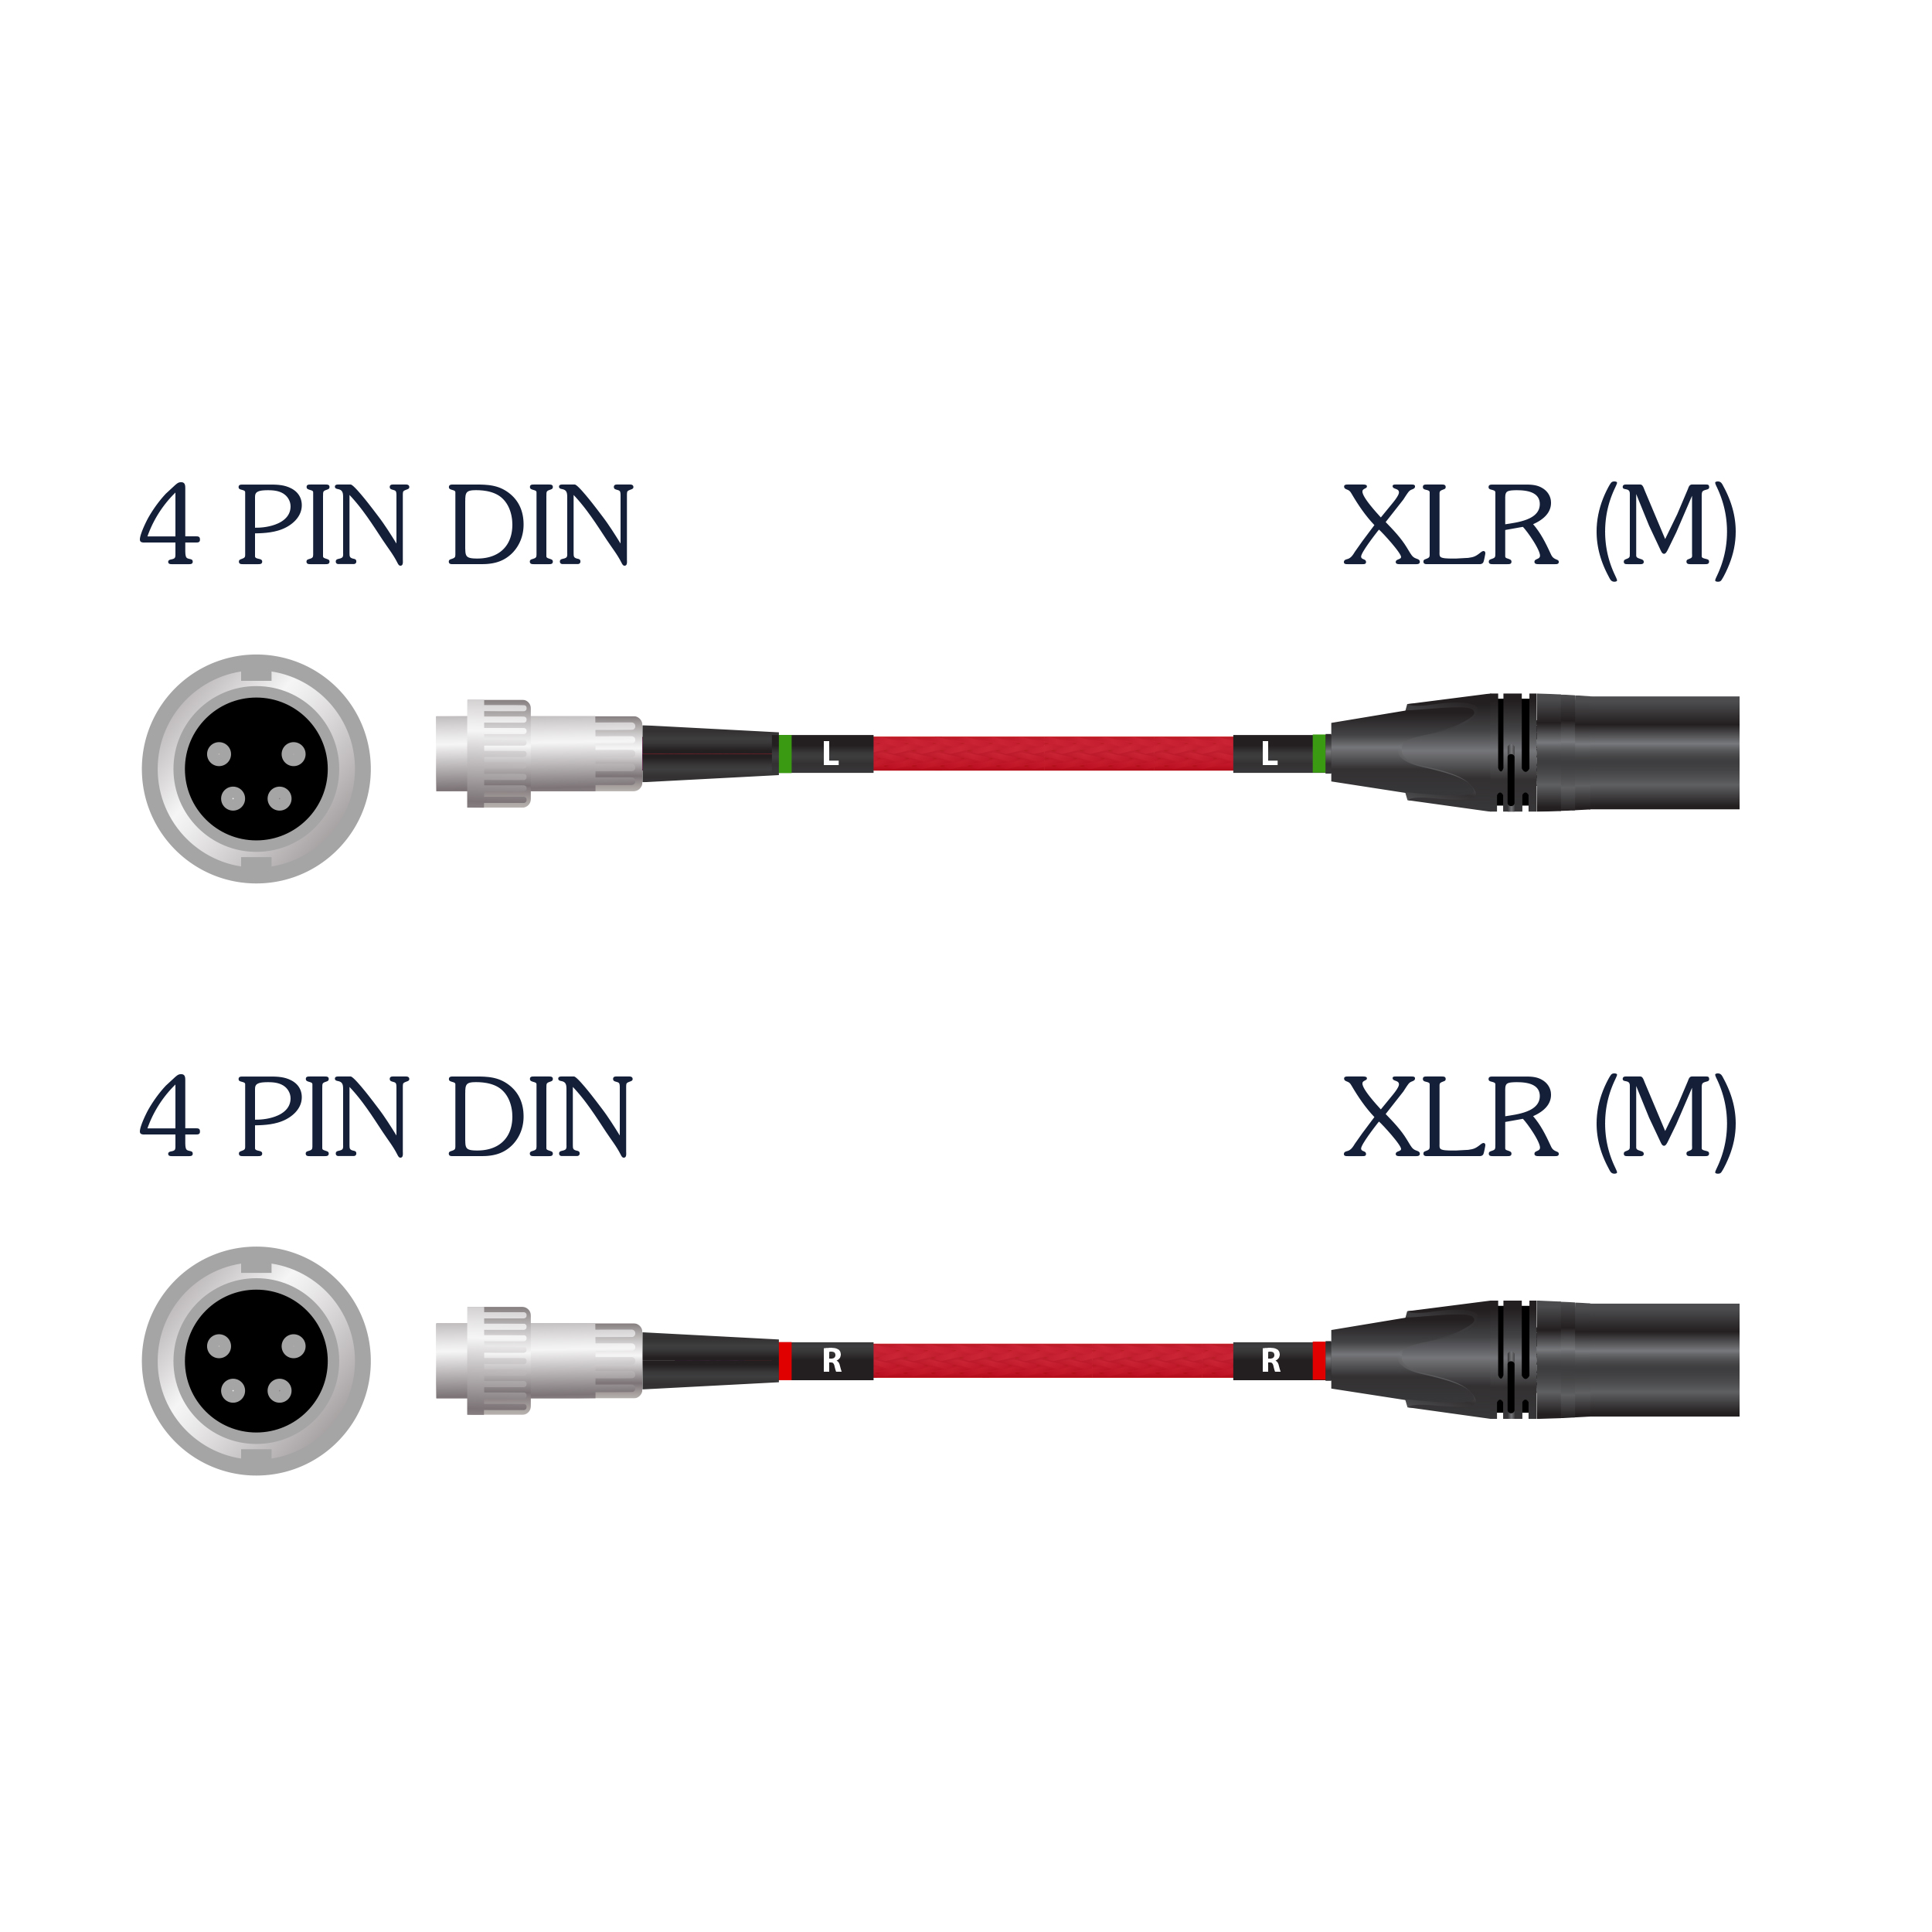 <p align="center">Red Dawn Specialty 4 Pin DIN To XLR (M) Cable Set</p>